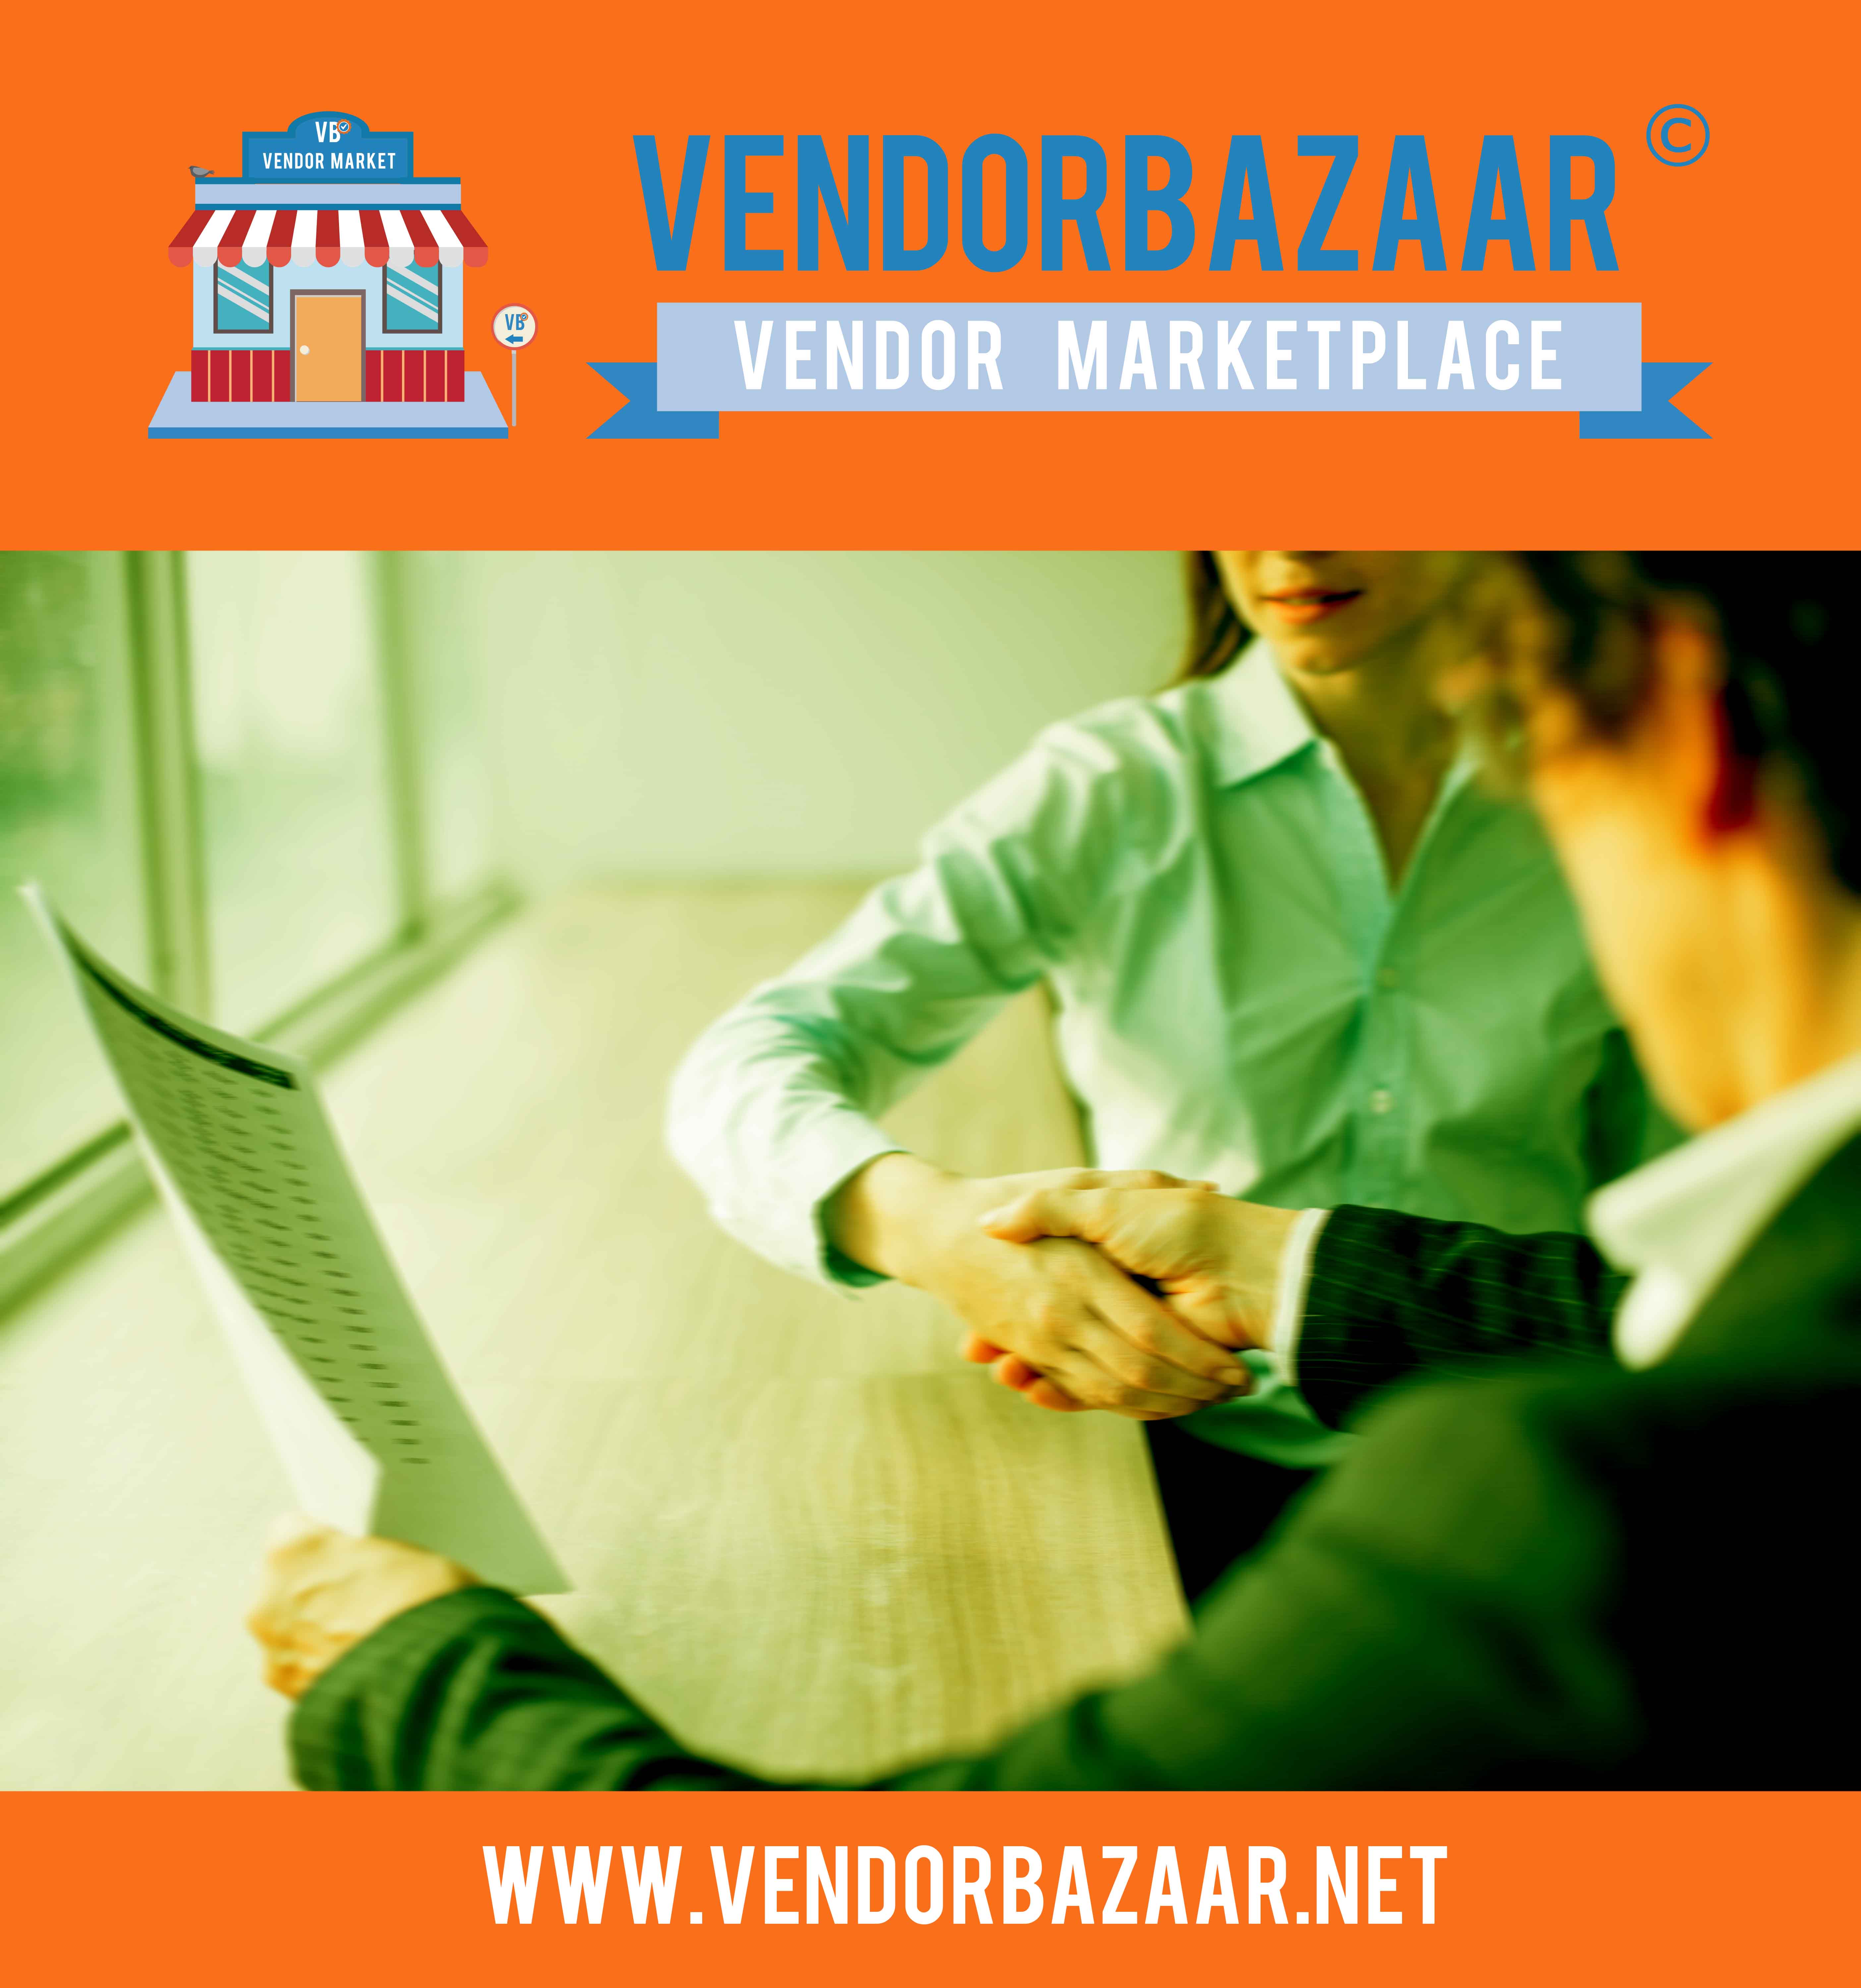 What are the Vendor Contract Negotiation Strategies? Read at the Vendor Marketplace.